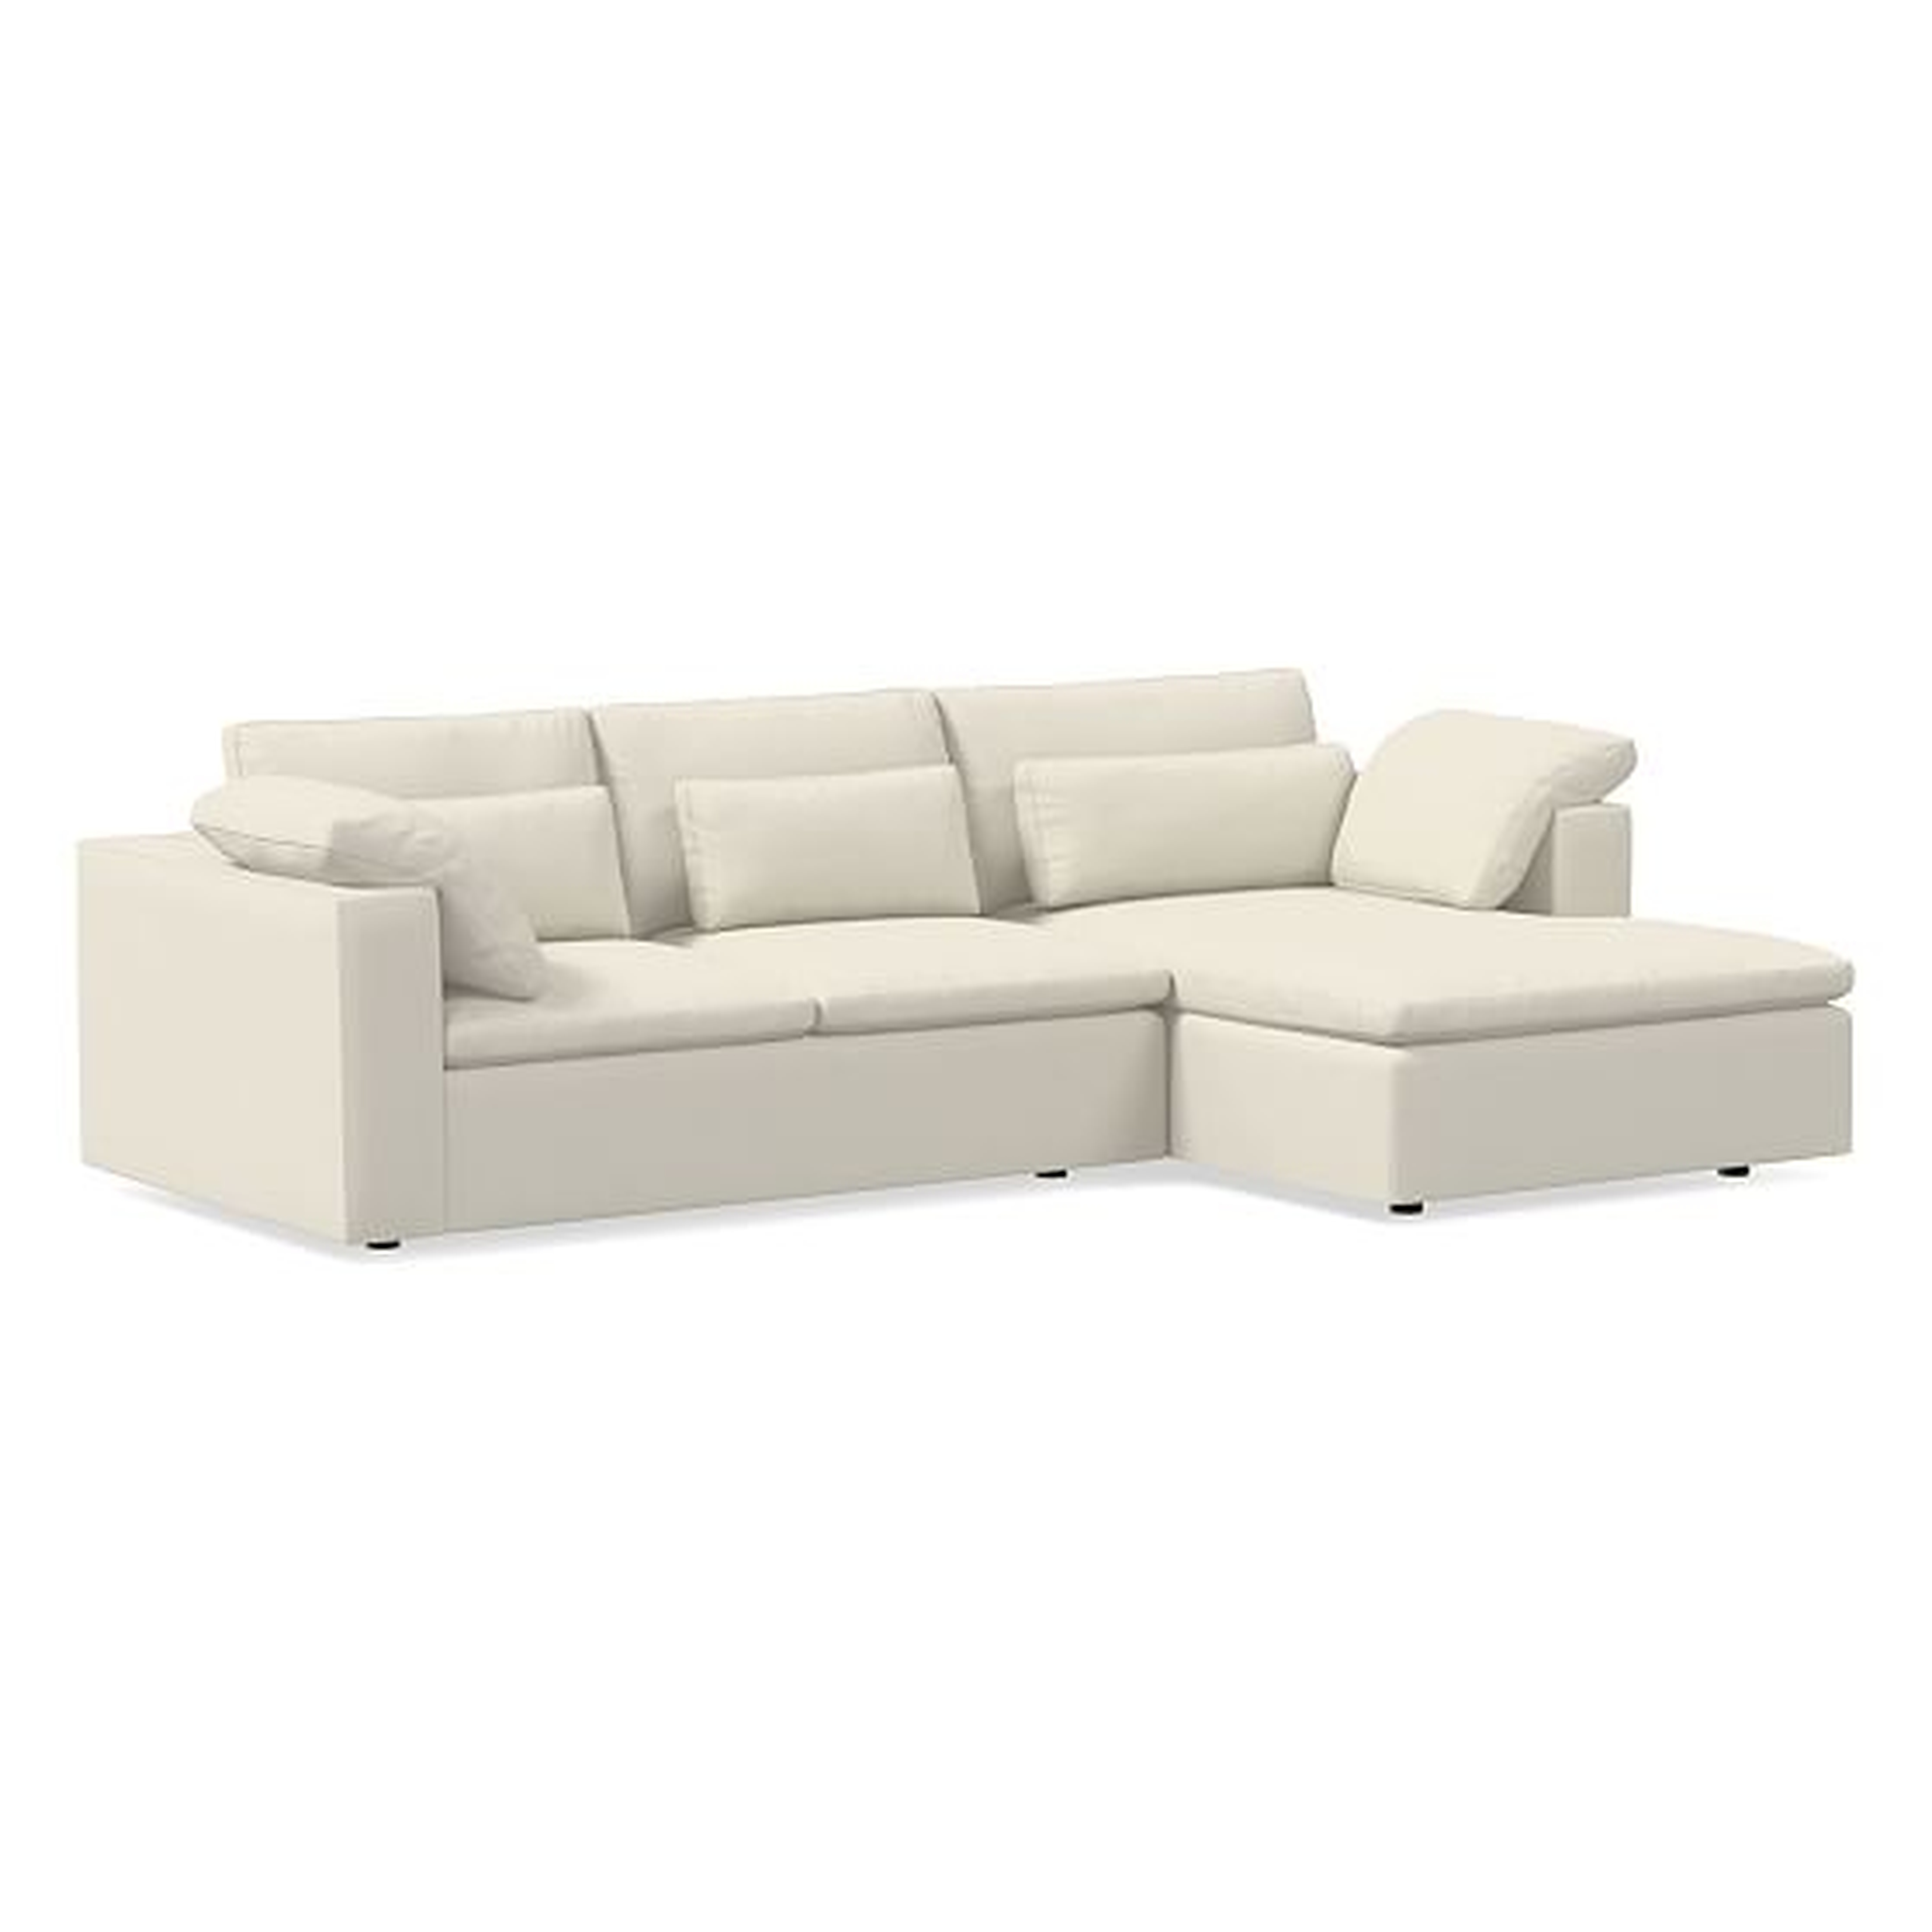 Harmony Modular Sectional Set 06: Left Arm Sofa &amp; Right Arm Chaise, Down, Luxe Boucle, Stone White - West Elm